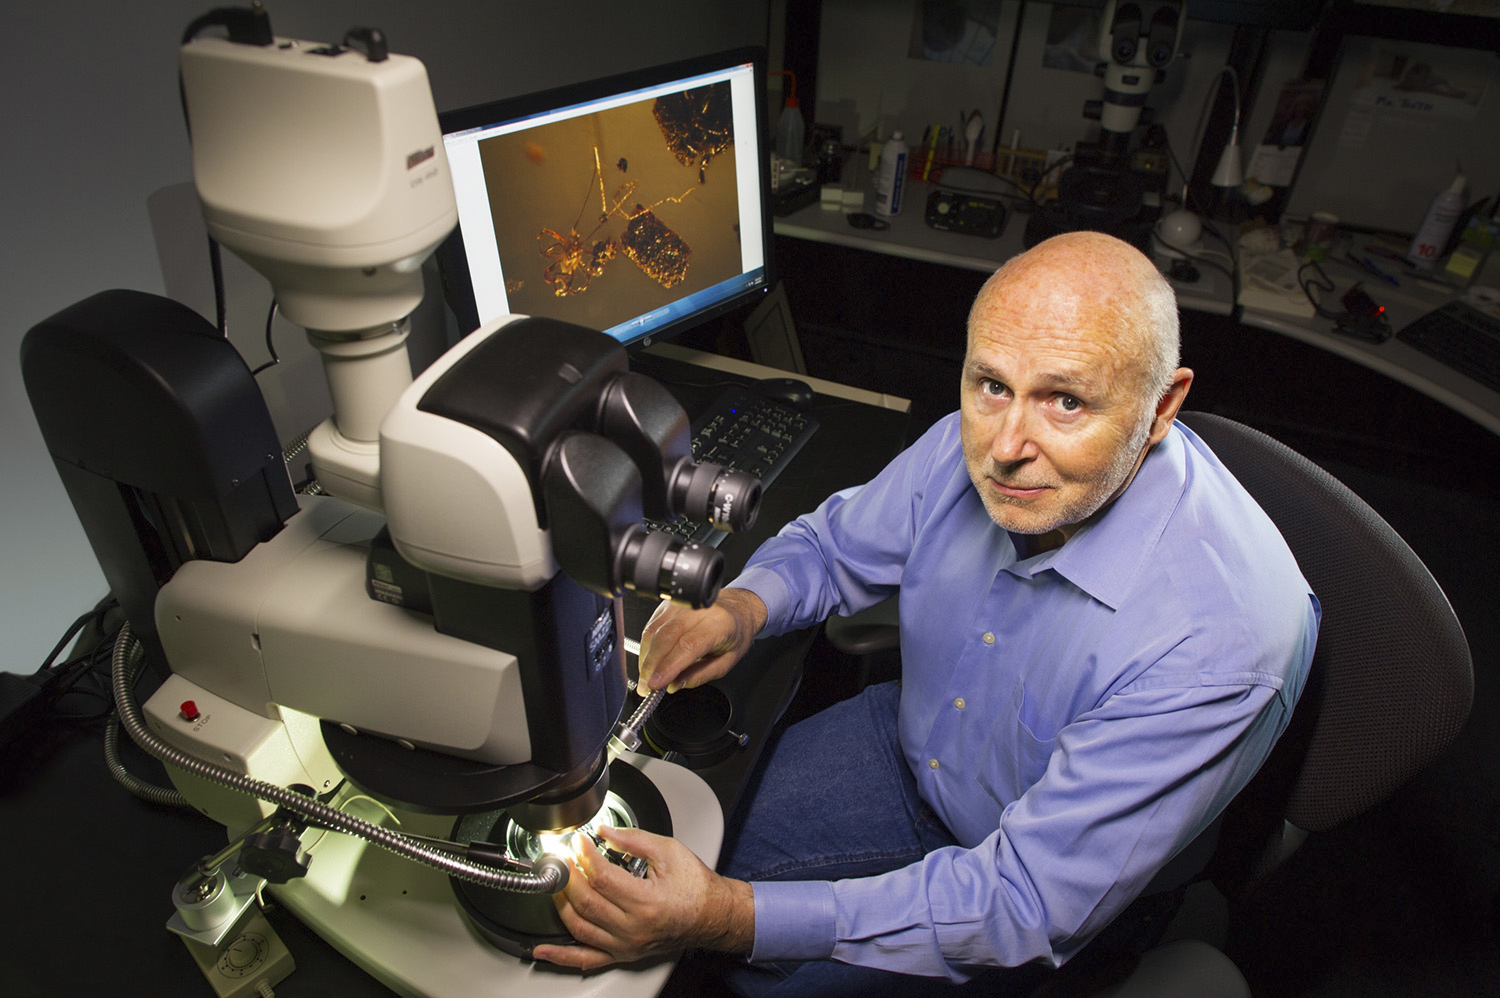 The world's foremost authority on inclusions in gemstones, John Koivula, with his advanced Nikon SMZ25 stereoscopic microscope with built-in image stacking capability. Image stacking is commonly used today to increase the depth of field for a medium that has extreme limits due to the high magnification.